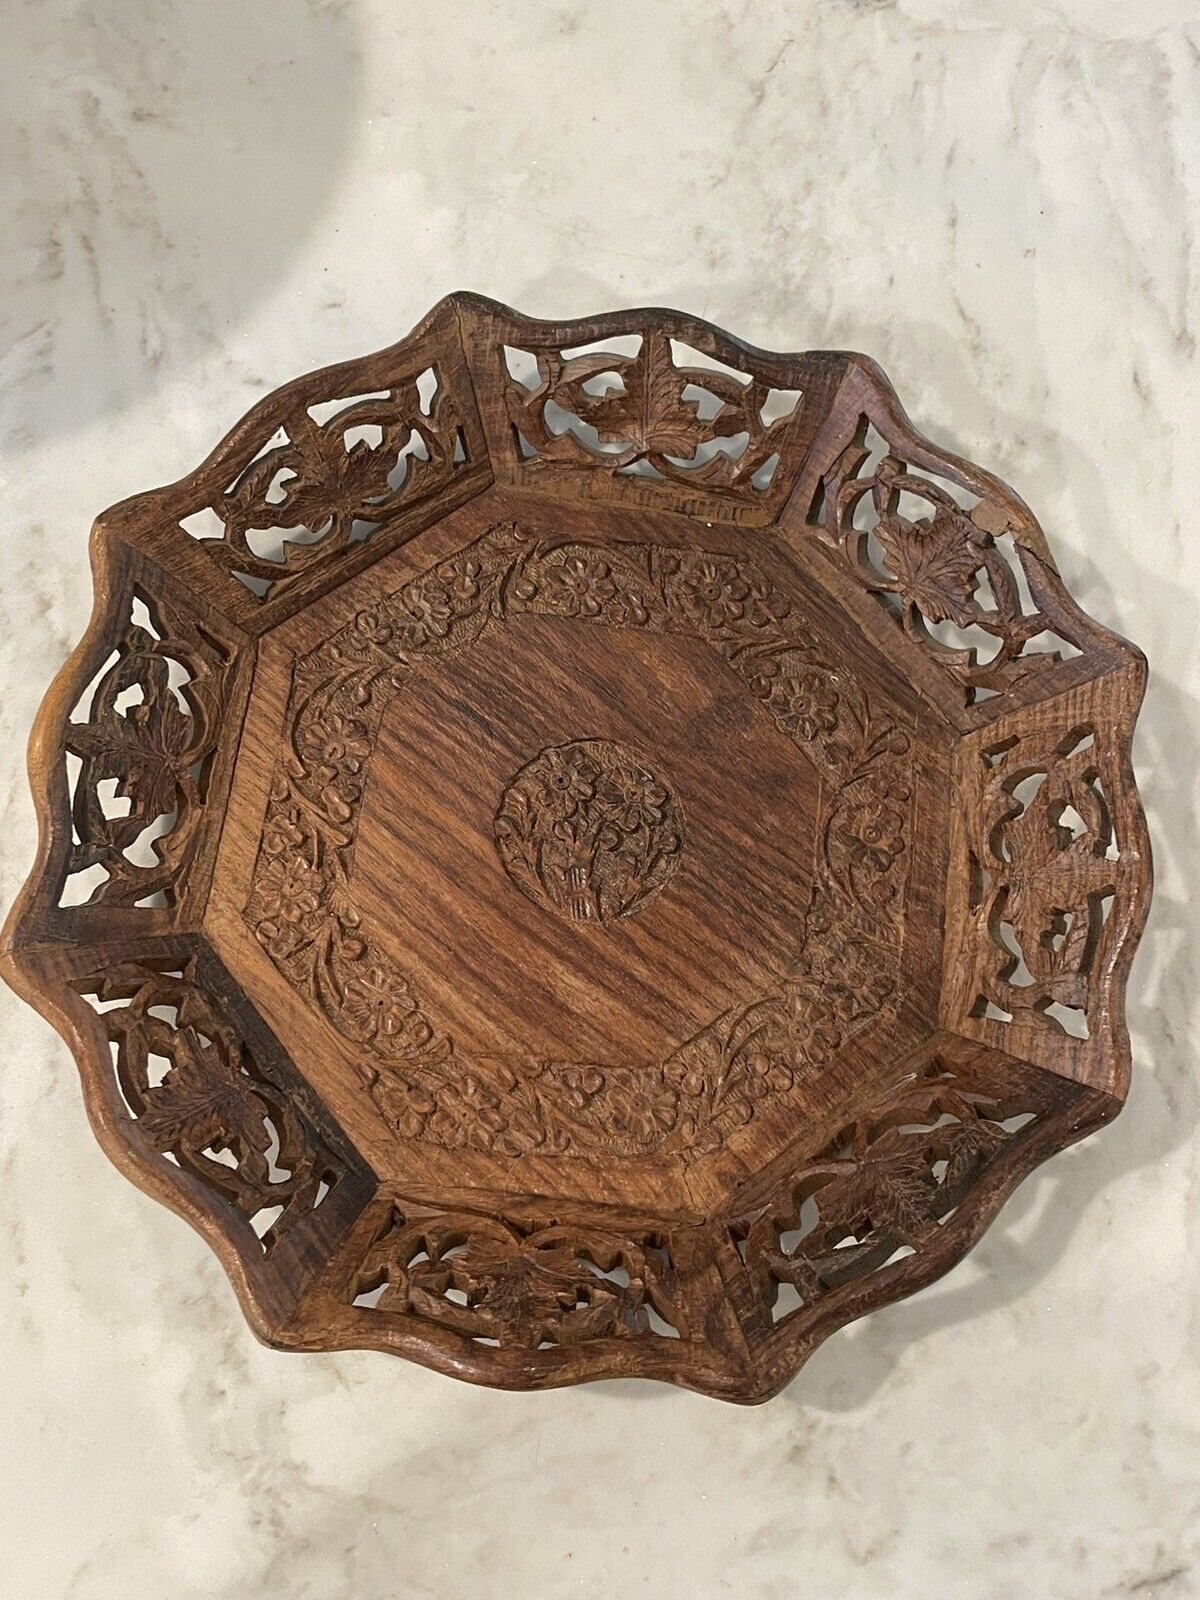 Vintage Hand Carved Wood Serving Tray Platter 10 Inch Floral Motif Made In India